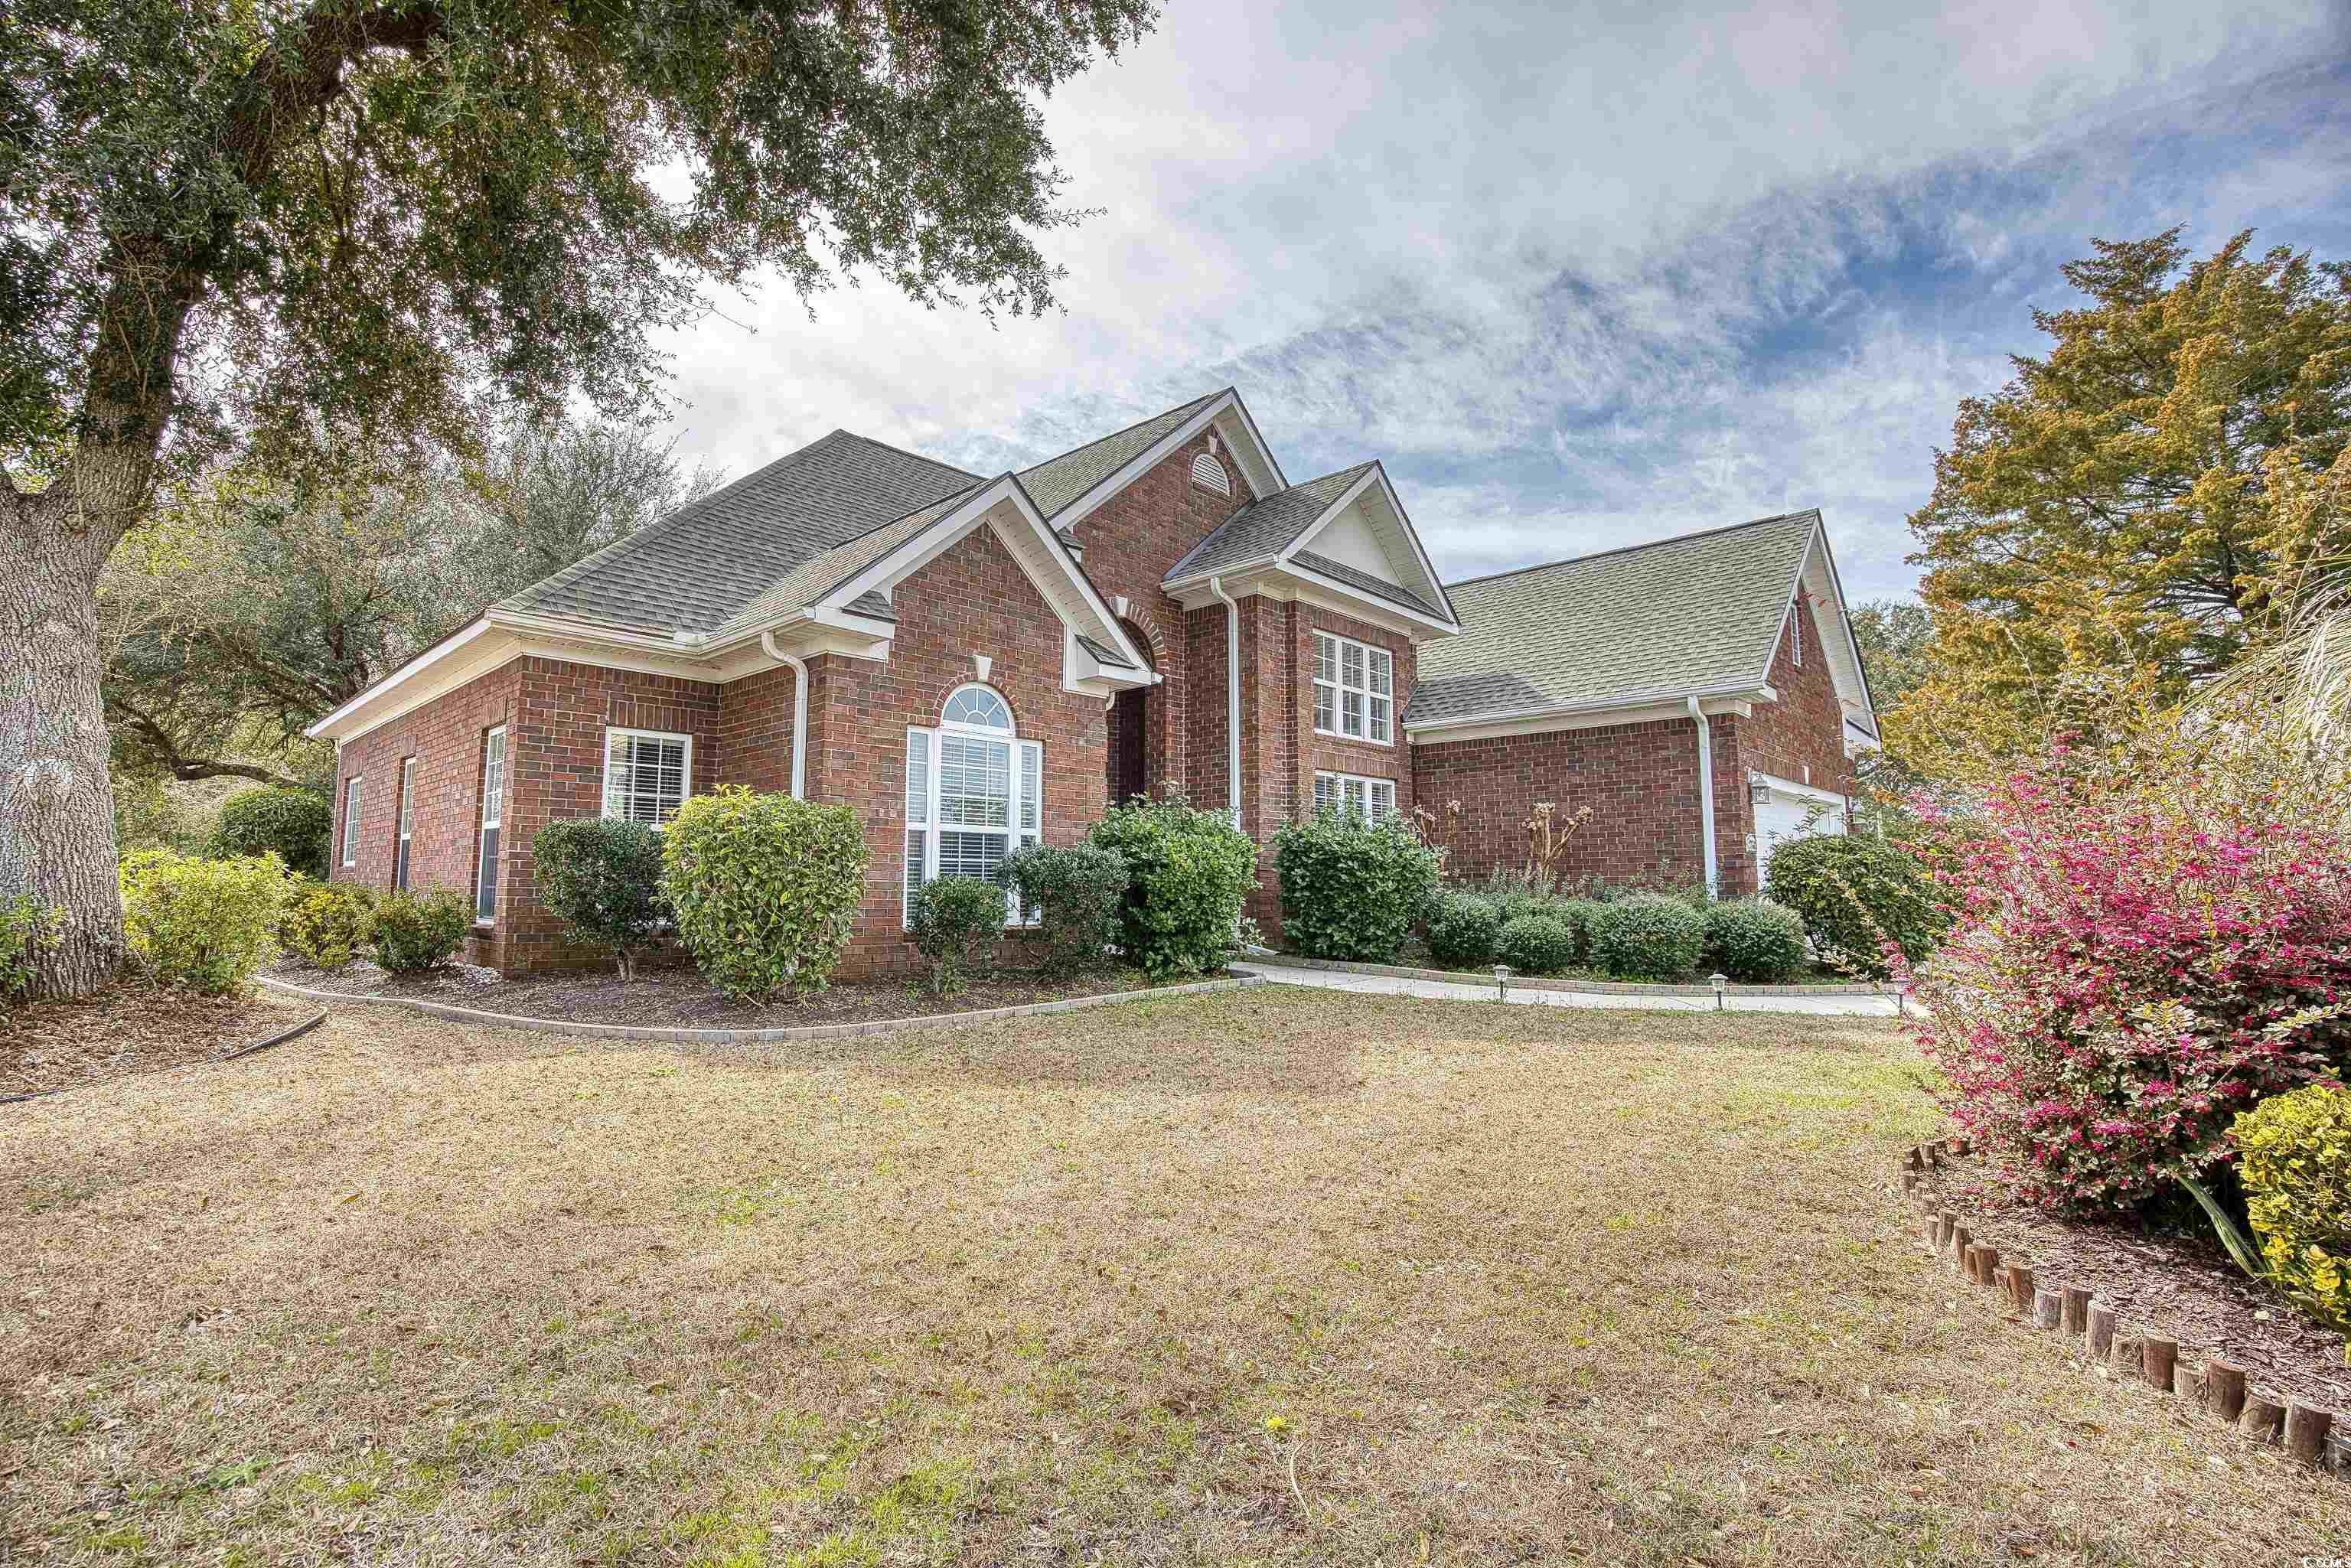 this beautiful single level brick front home is just steps to the atlantic intracoastal waterway and a short 2 mile ride to the beach. large lot with private patio & outdoor fireplace. no hoa. high ceilings, new roof 2023, split floor plan, eat in kitchen and formal dining area, wood floors in great room & formal dining area and italian tile floors in kitchen and breakfast area. perfect size & location!